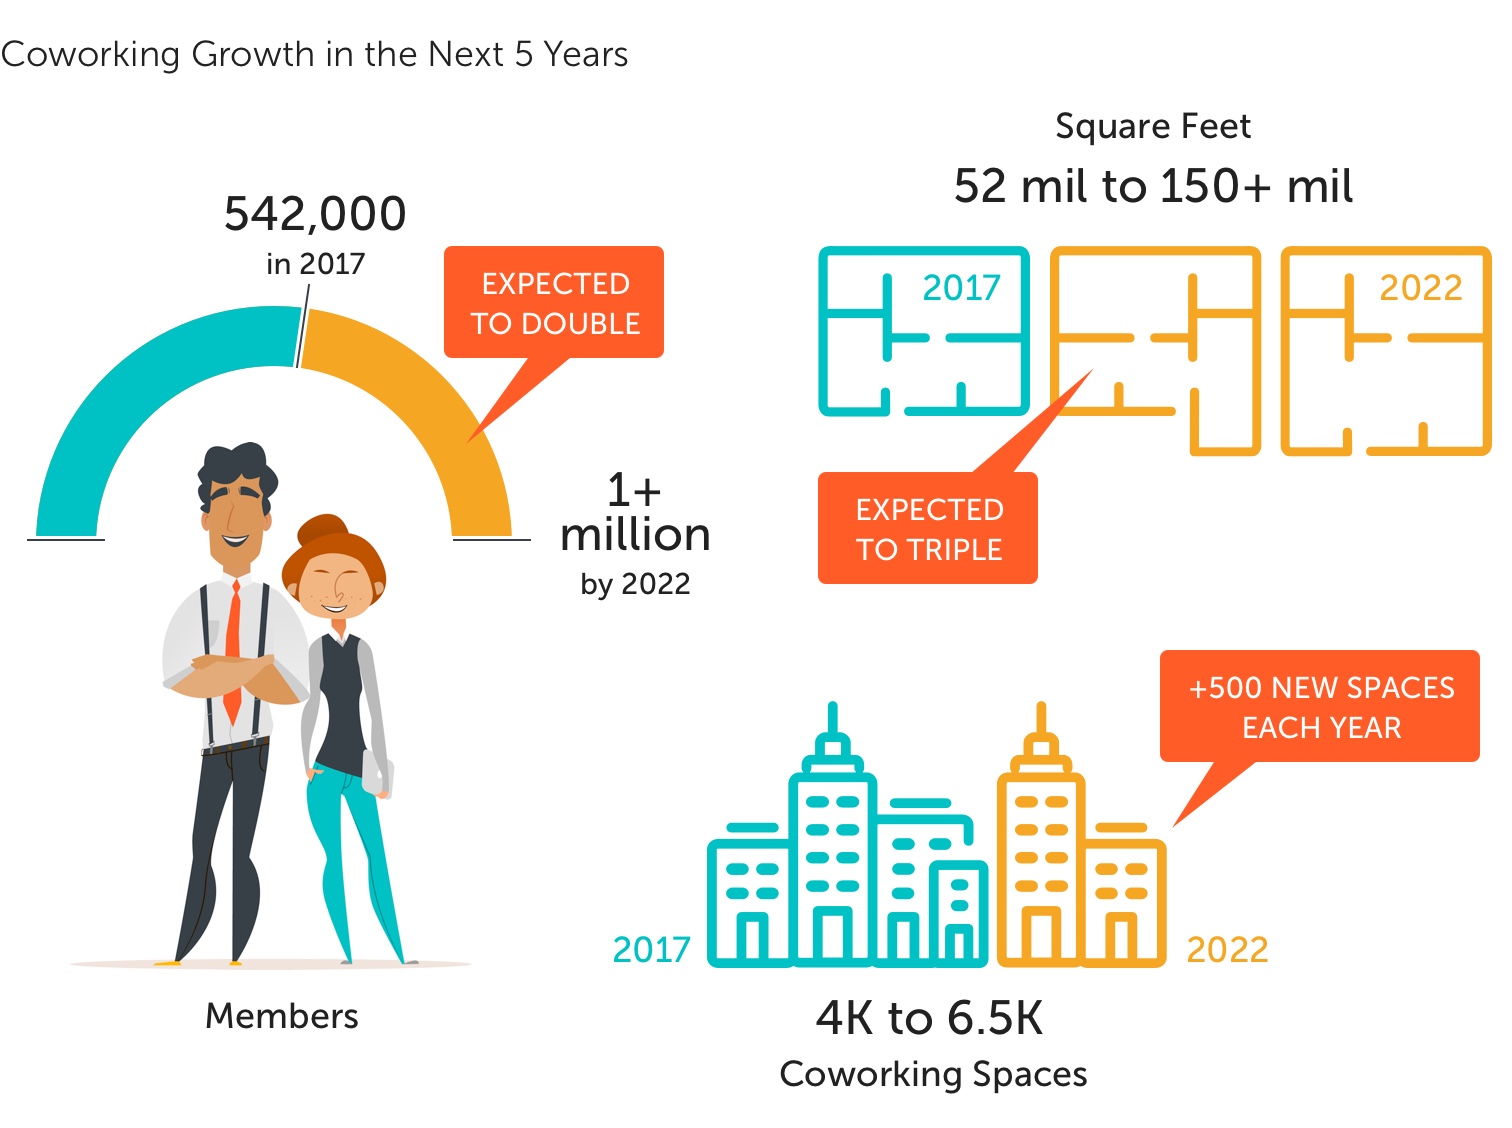 Coworking Growth in the Next 5 Years